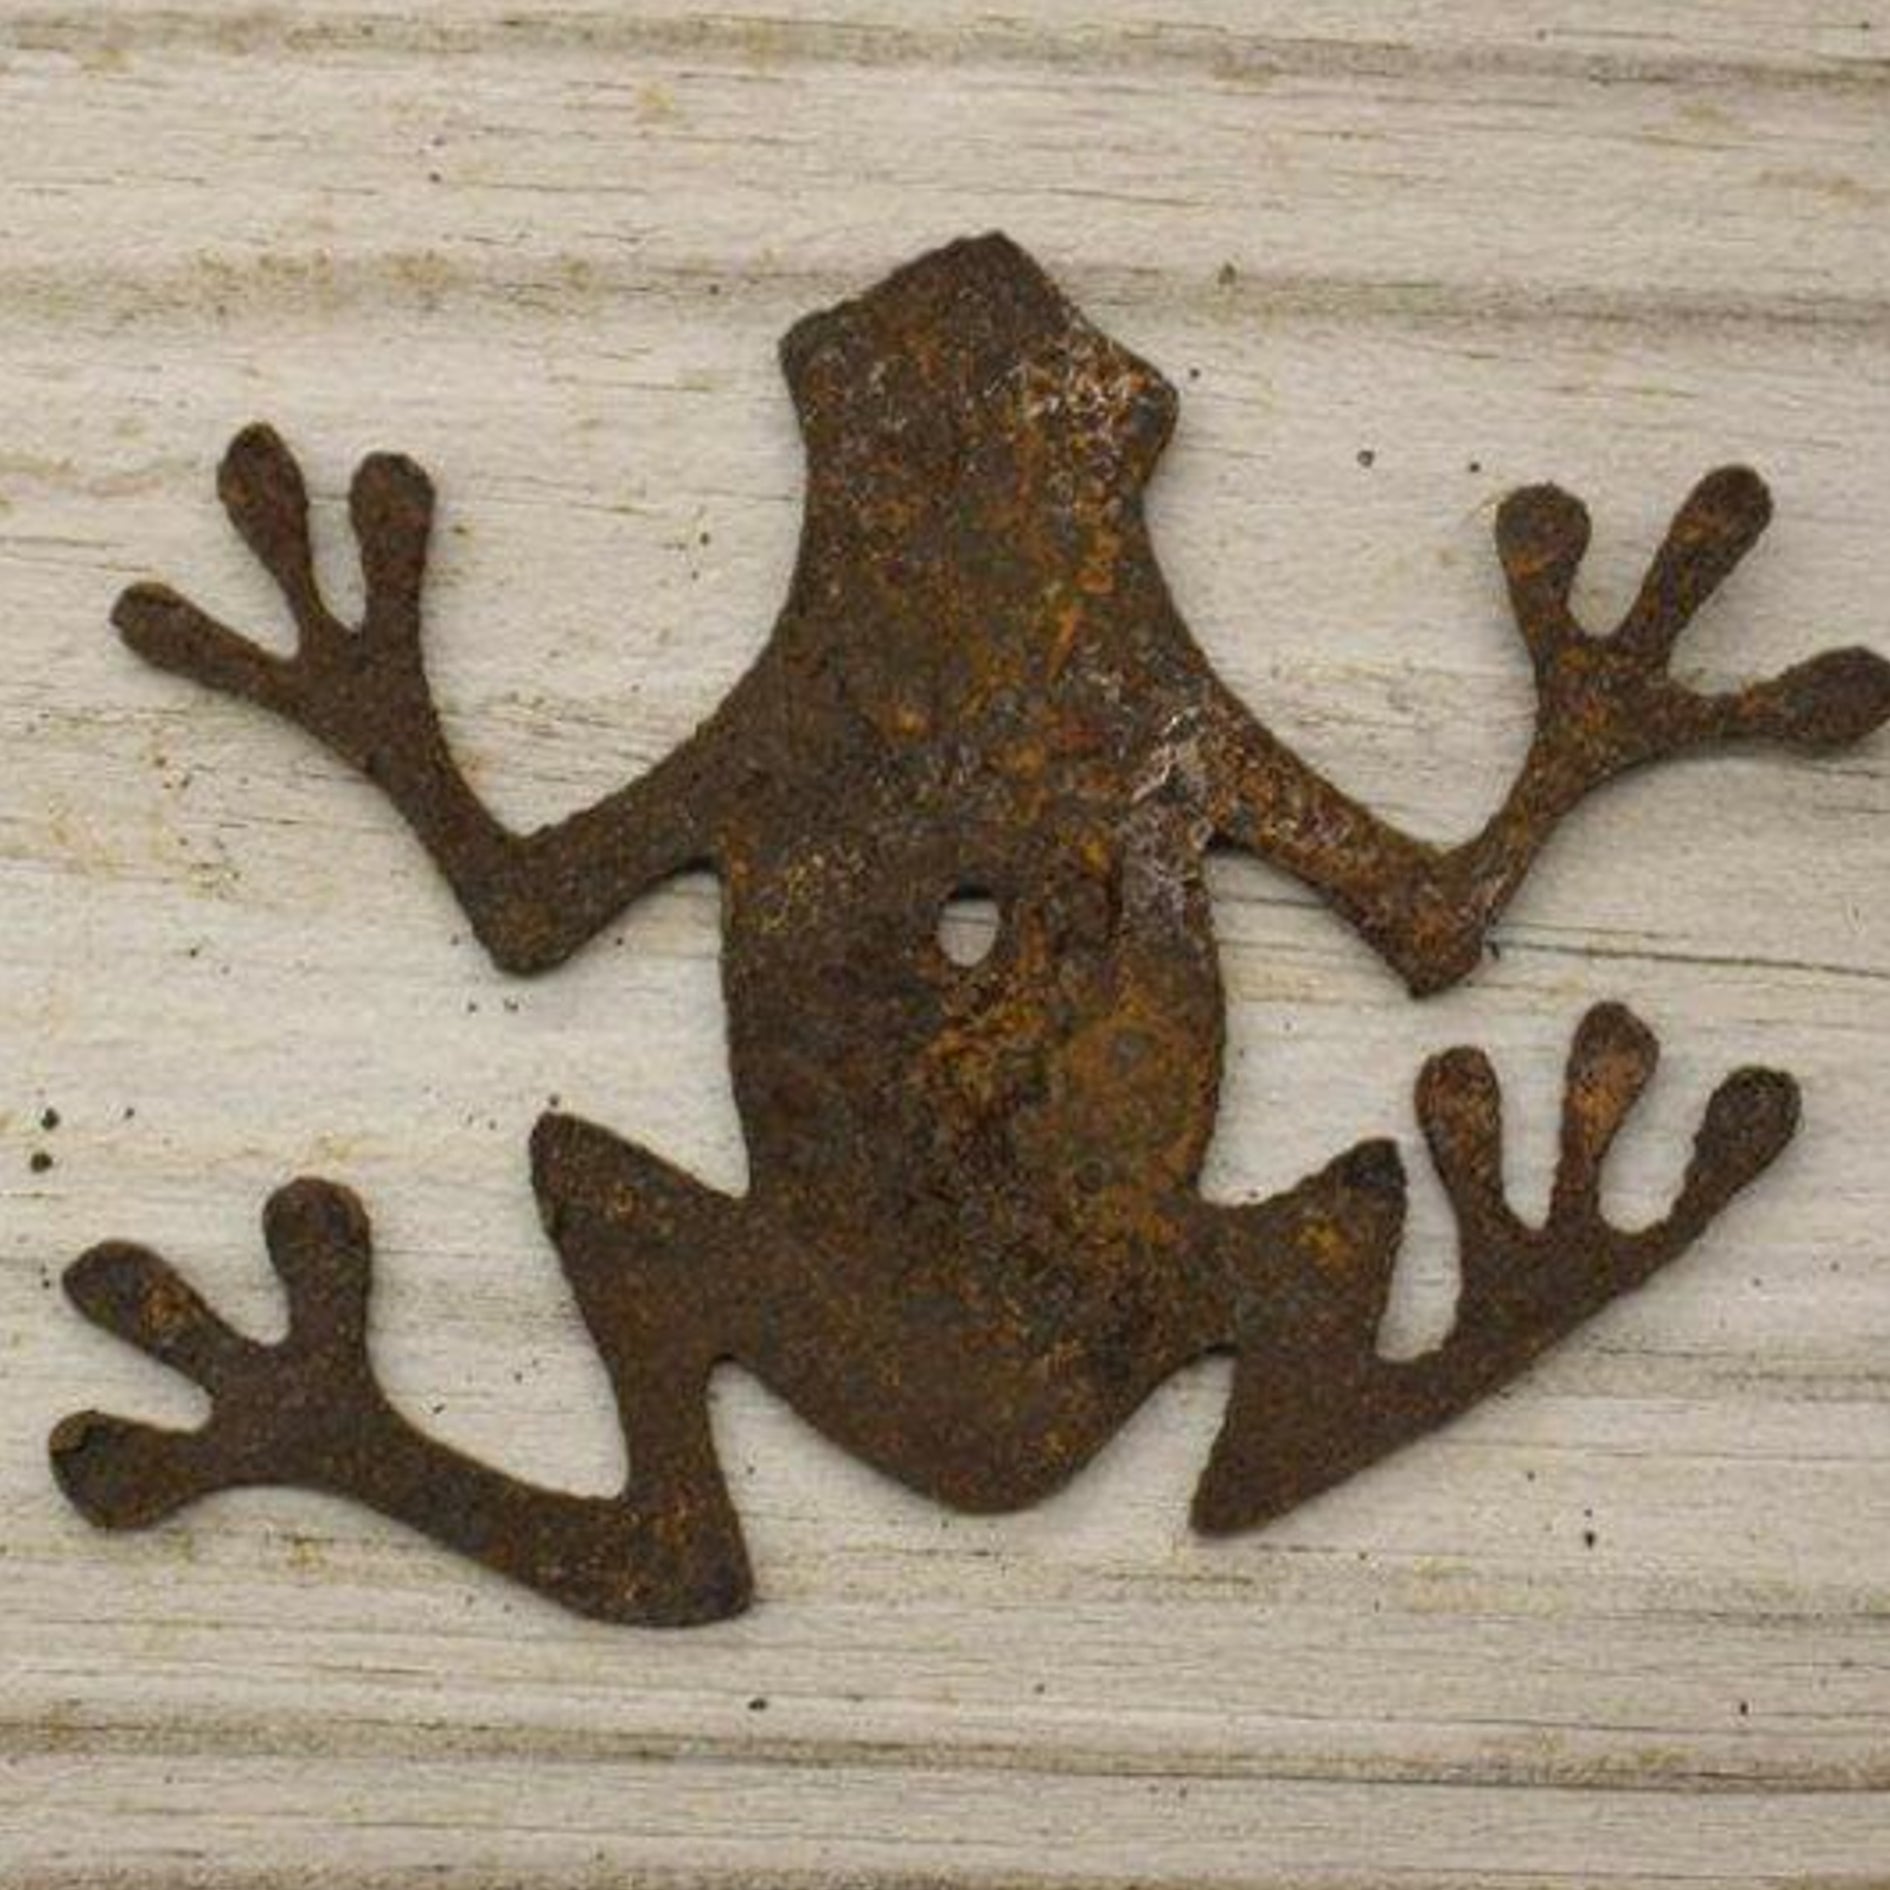 Rusted Frog- made from rusty steel - Da Vinci Chalk Paint & Rustic home decor